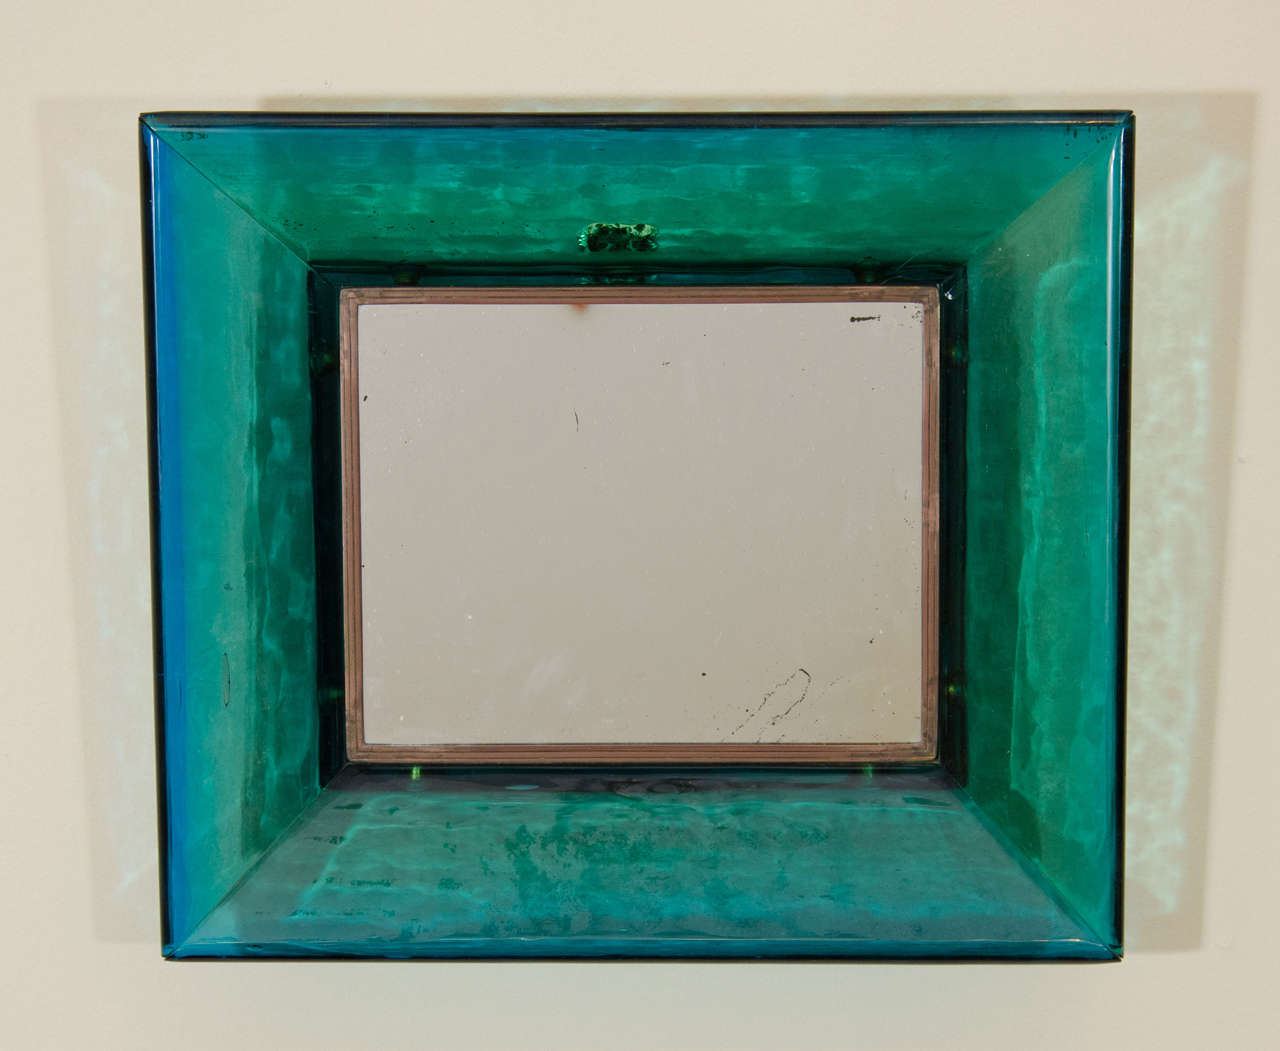 A vintage Carlo Scarpa for Venini glass frame Mid Century wall mirror. The glass frame is a blue-green color and is trimmed with bronze. There are bronze hangers on the back so the mirror can be hung either horizontally or vertically. 

Good